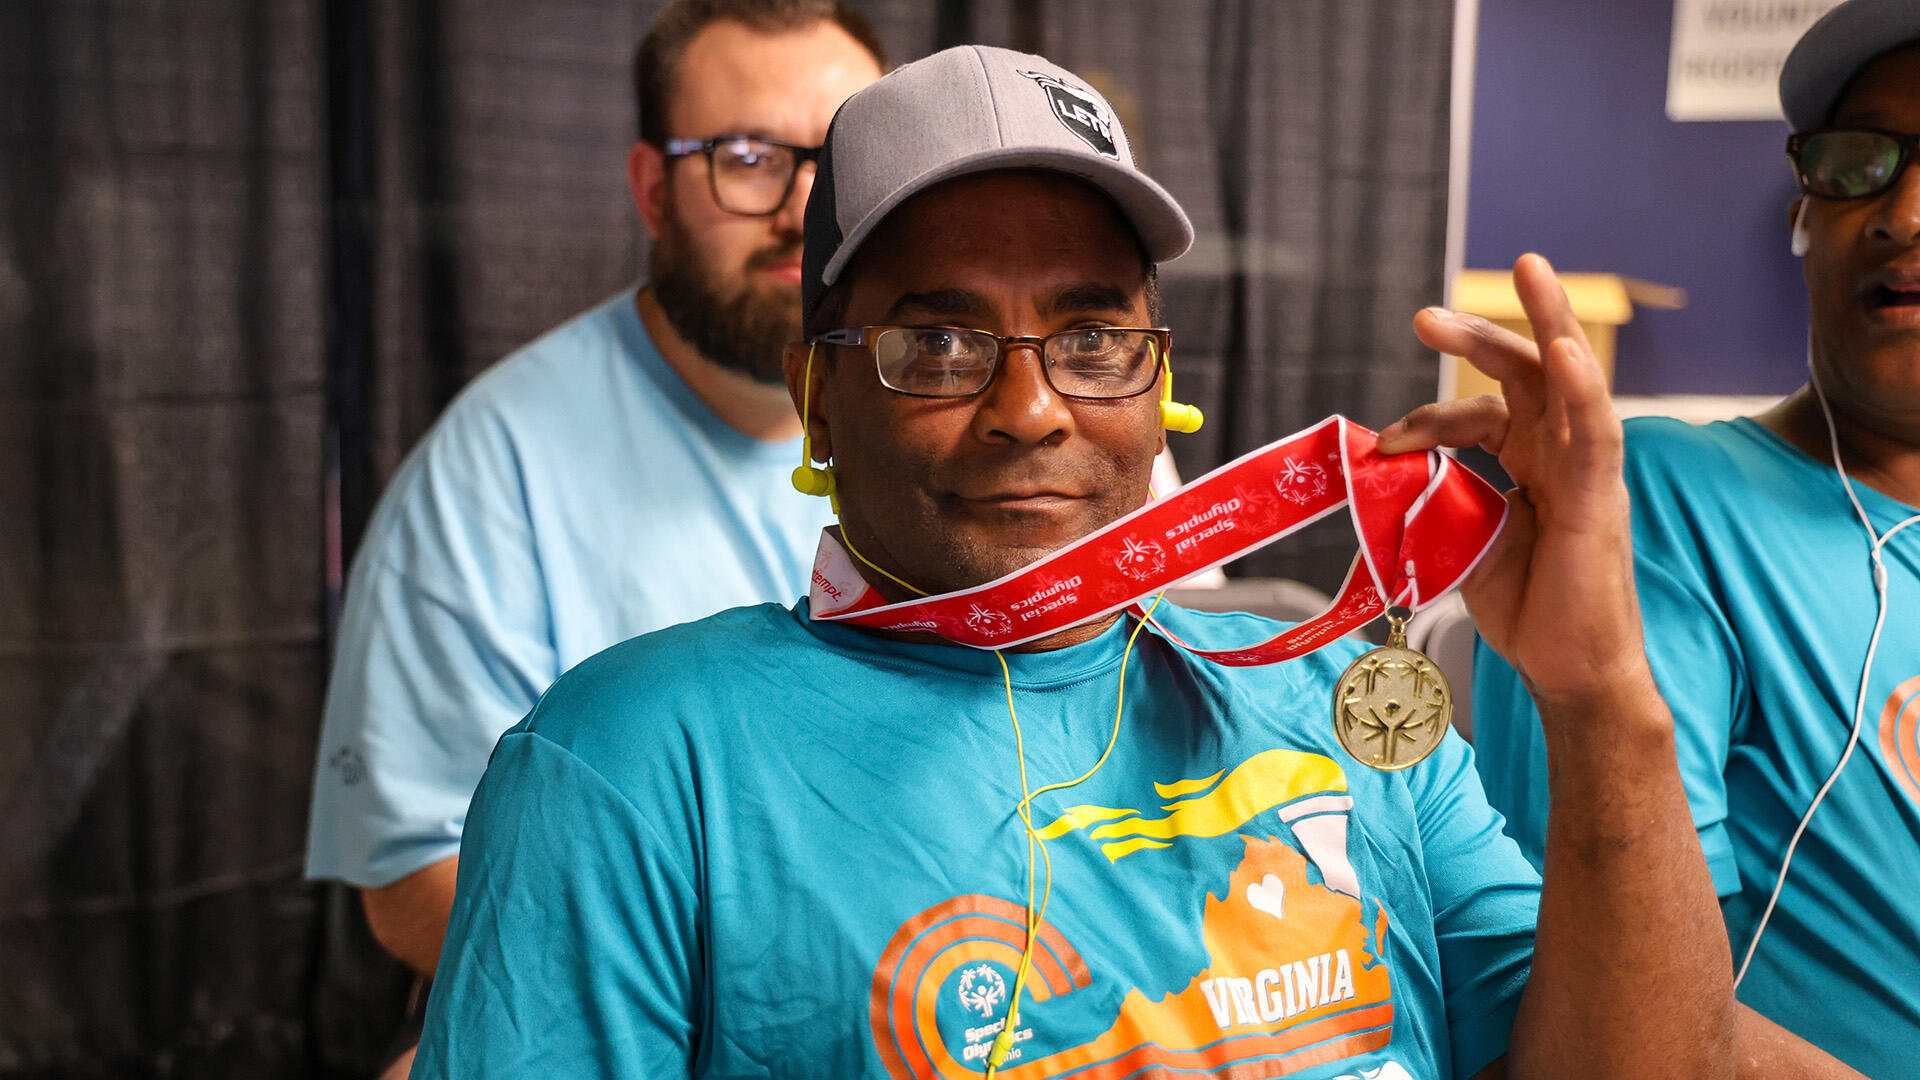 A photo of a man wearing glasses, a blue t-shirt, and a gray baseball hat holding up a gold medal that is around his neck. The medal is hanging off of a red ribbon. Next to him is a man wearing the same shirt and hat looking at the man wearing the medal, and behind the two men is another man wearing a light blue t-shirt and glasses. 